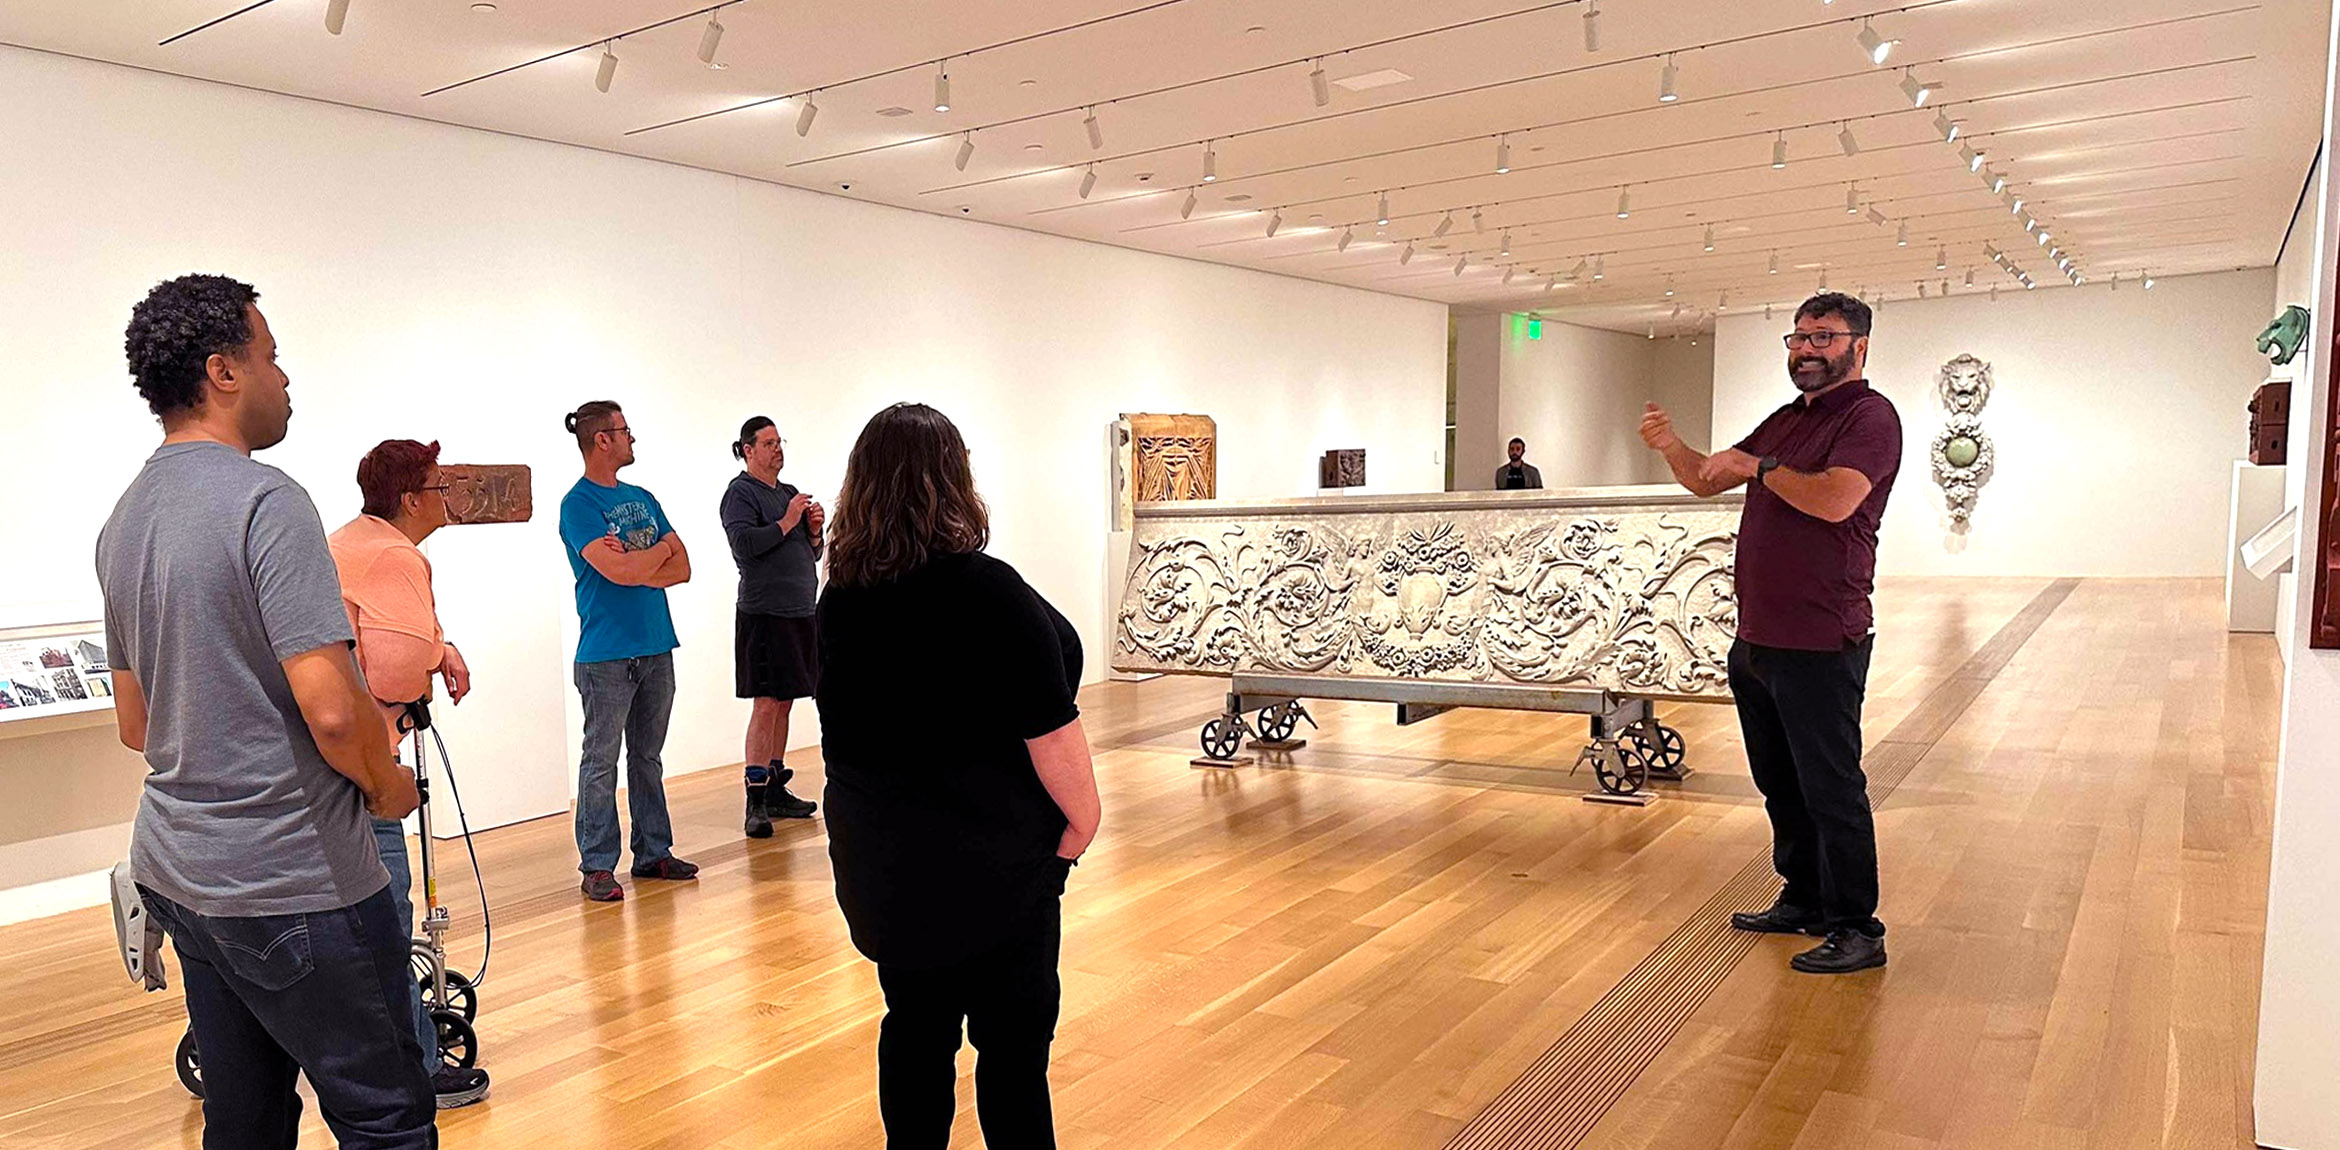 An ASL guide leads a tour at a museum gallery